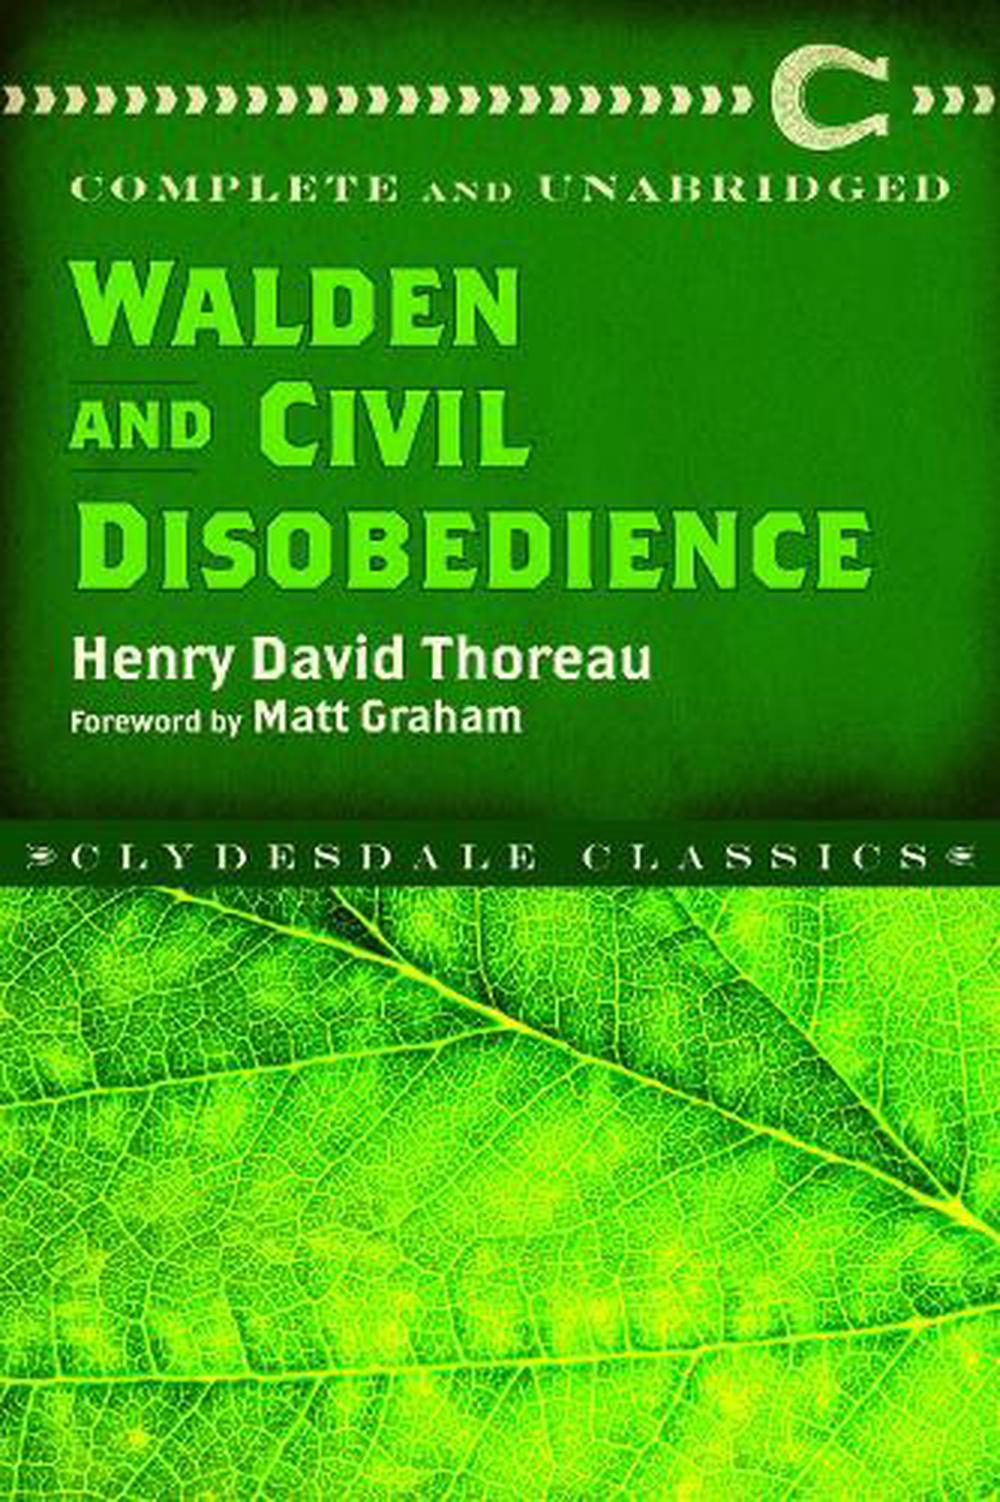 civil disobedience by henry david thoreau